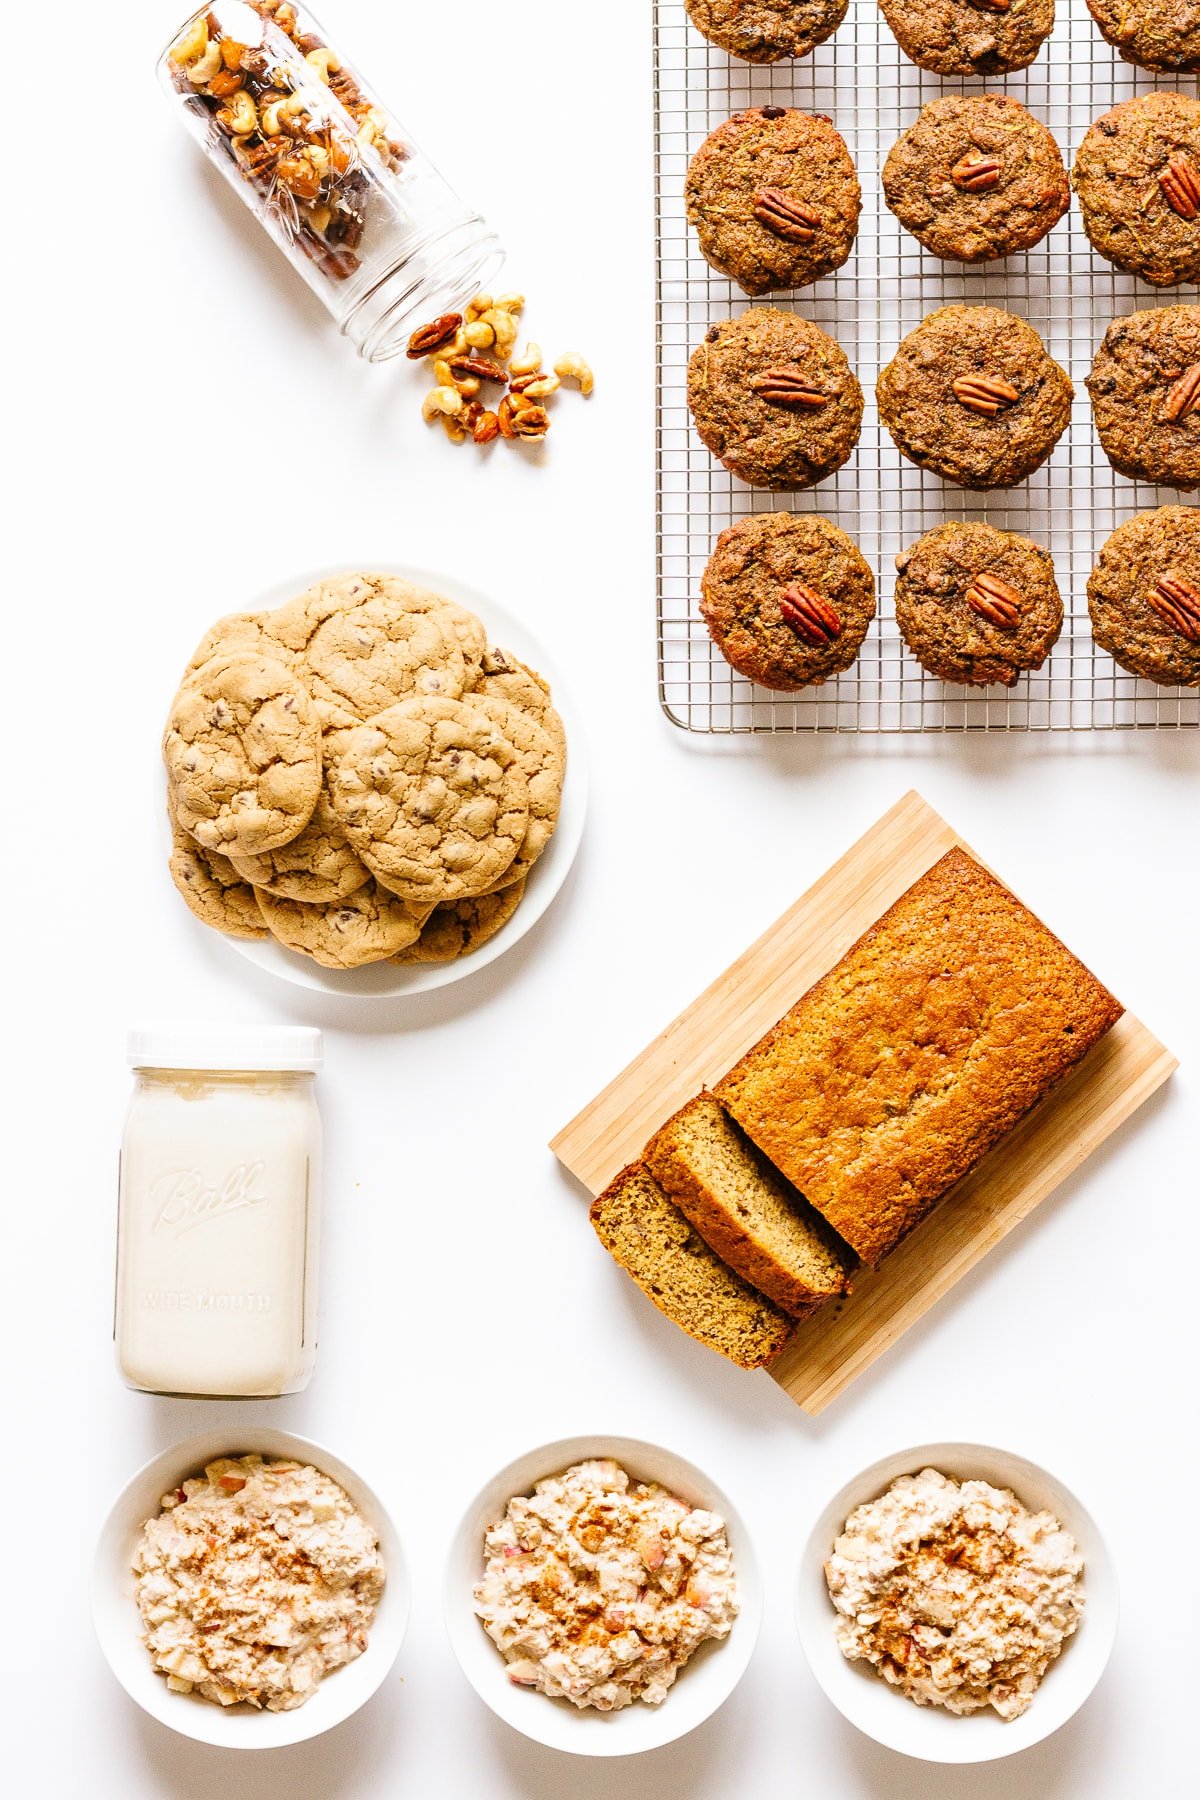 Overhead photo of muffins, spiced nuts, chocolate chip cookies, banana bread, jar of cashew cream and 3 bowls of Bircher Muesli all set on a white background.